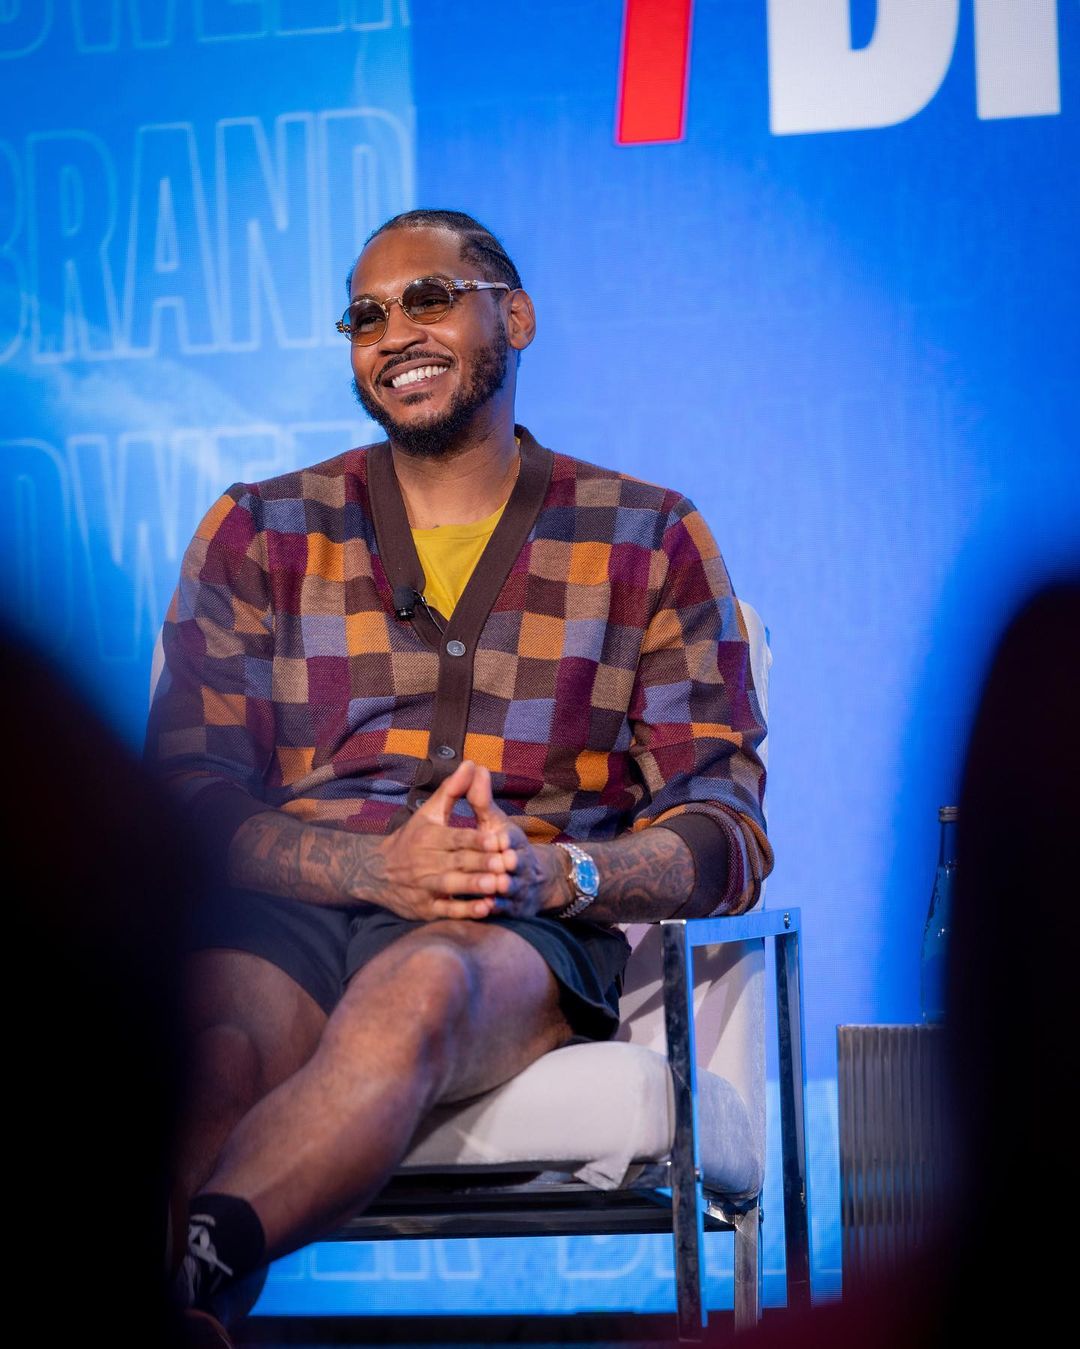 Carmelo Anthony Gets Philosophical About His Goals Beyond the NBA